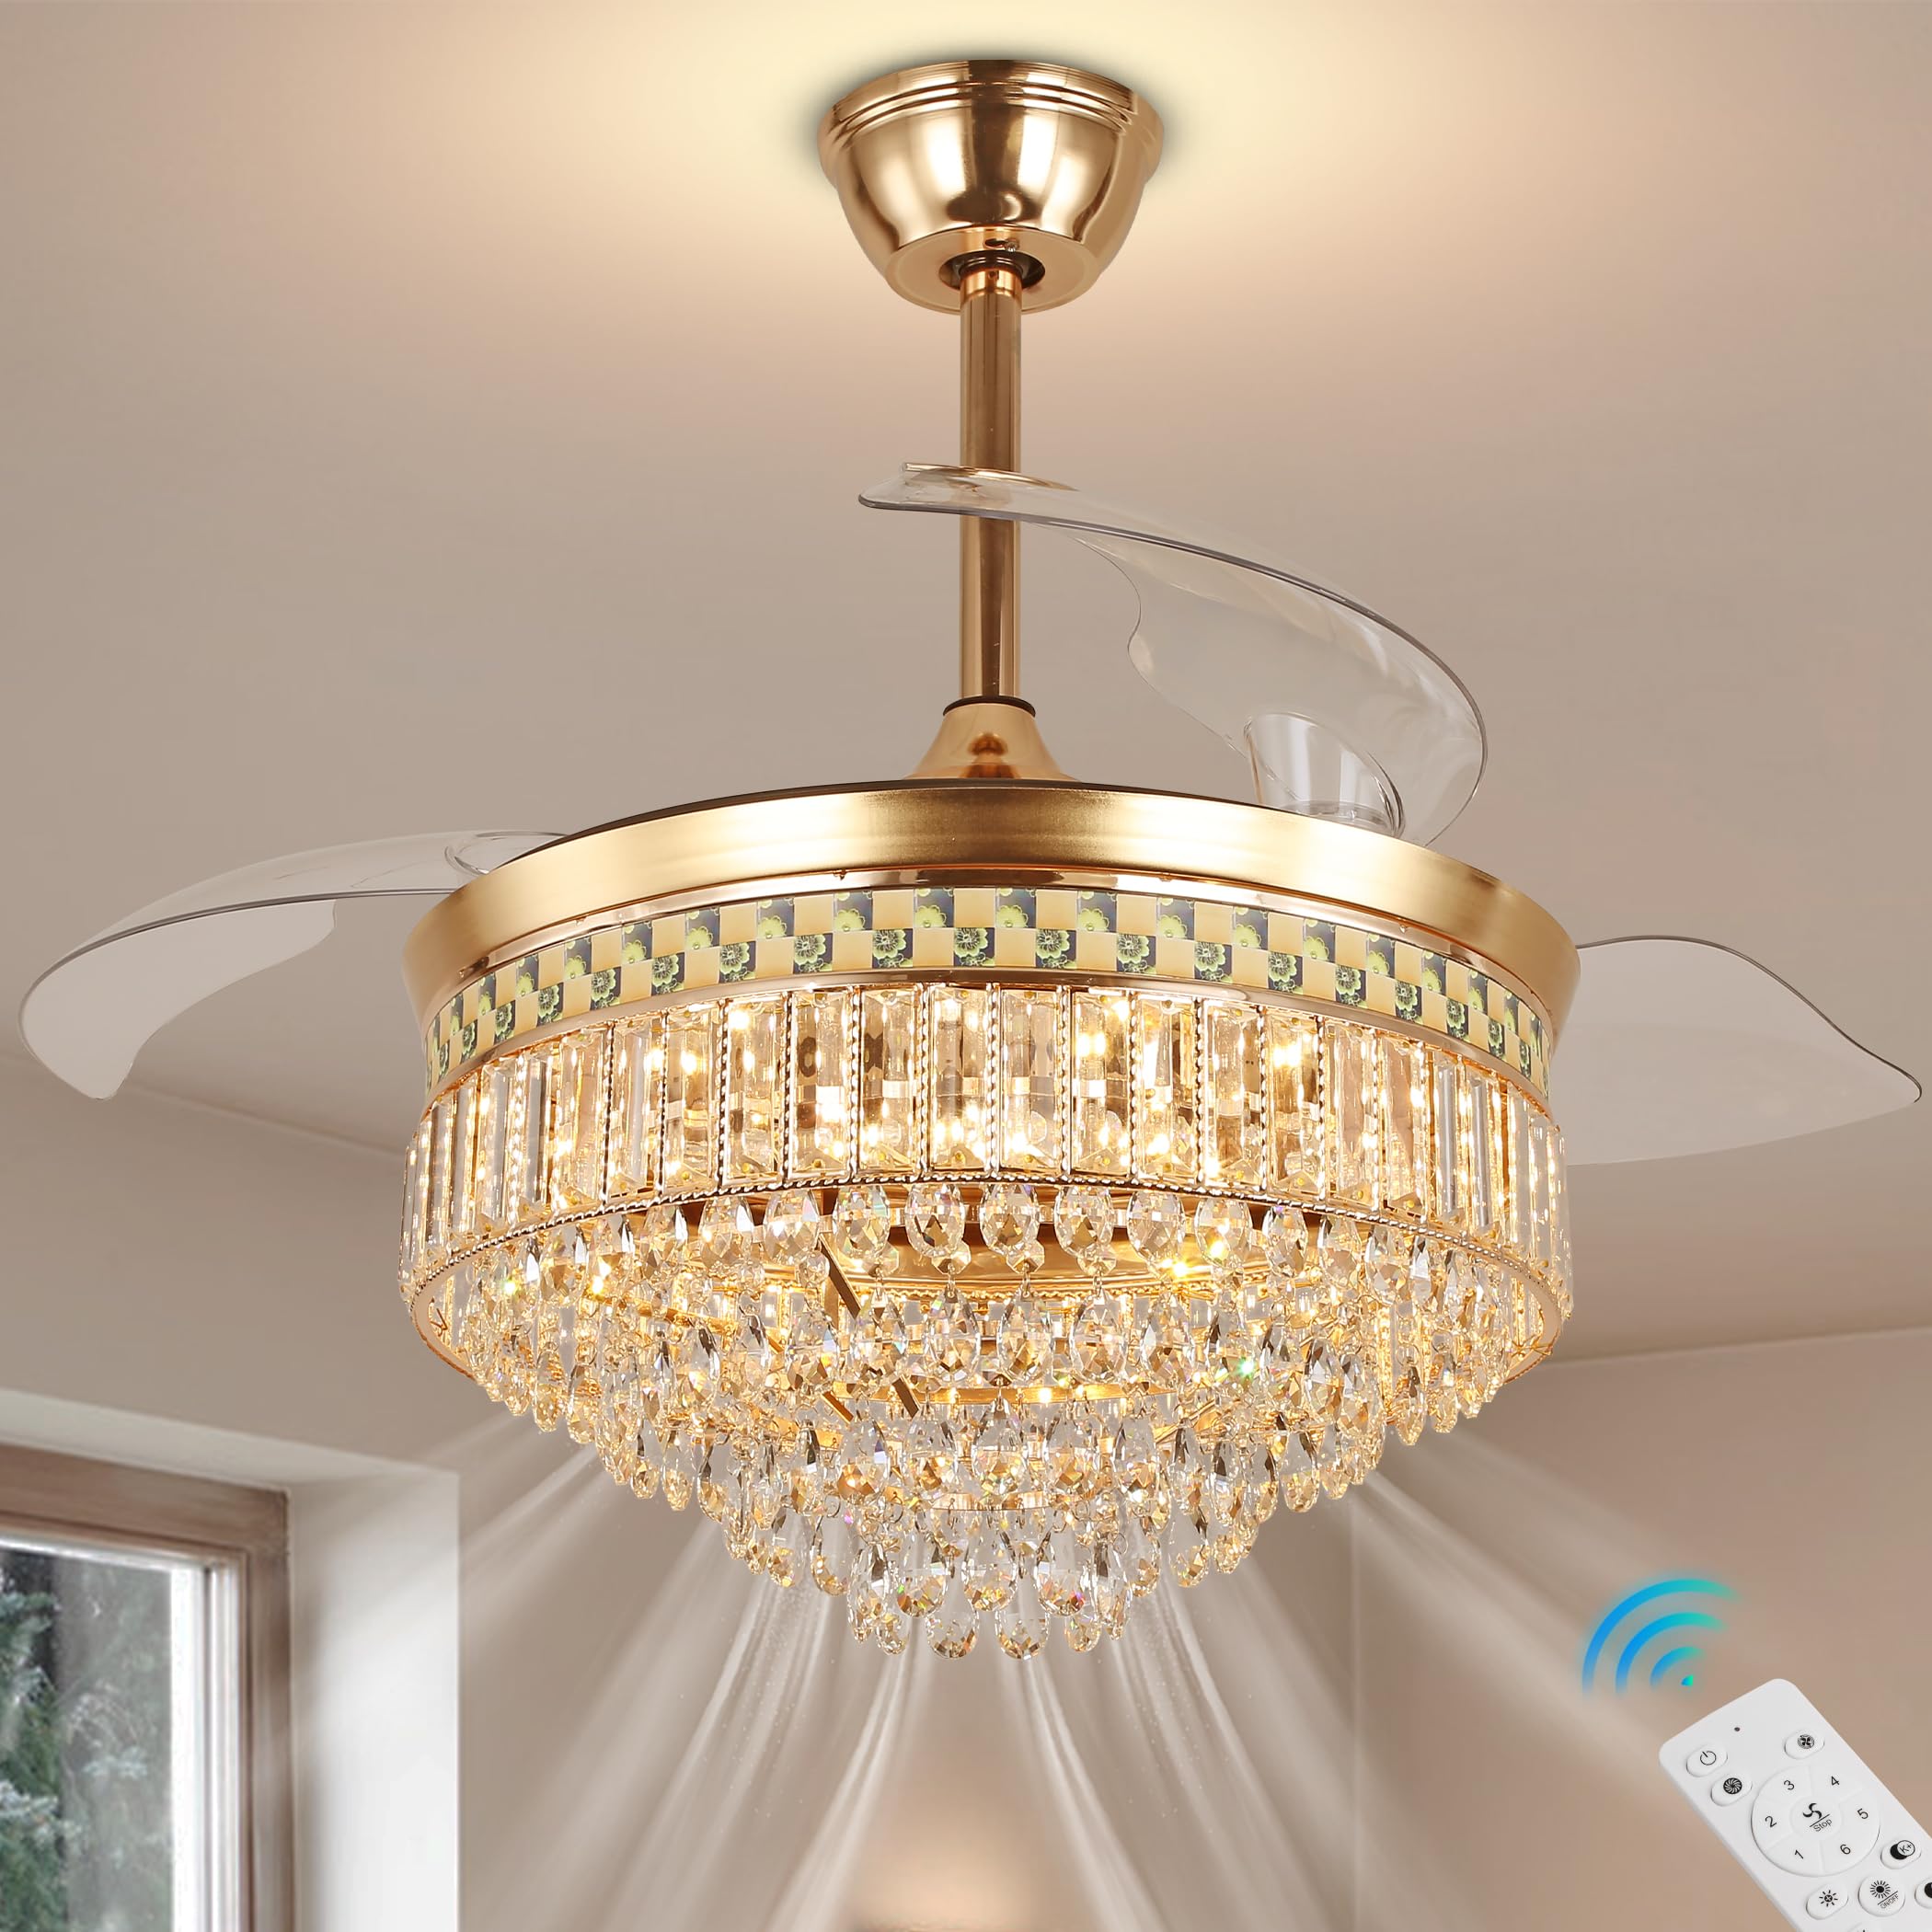 42'' Dimmable Fandalier Crystal Ceiling Fans LED Retractable Ceiling Fandeliers Chandelier with Light and Remote Ceiling Fan for Bedroom, APP & Memory Function, 6 Speeds